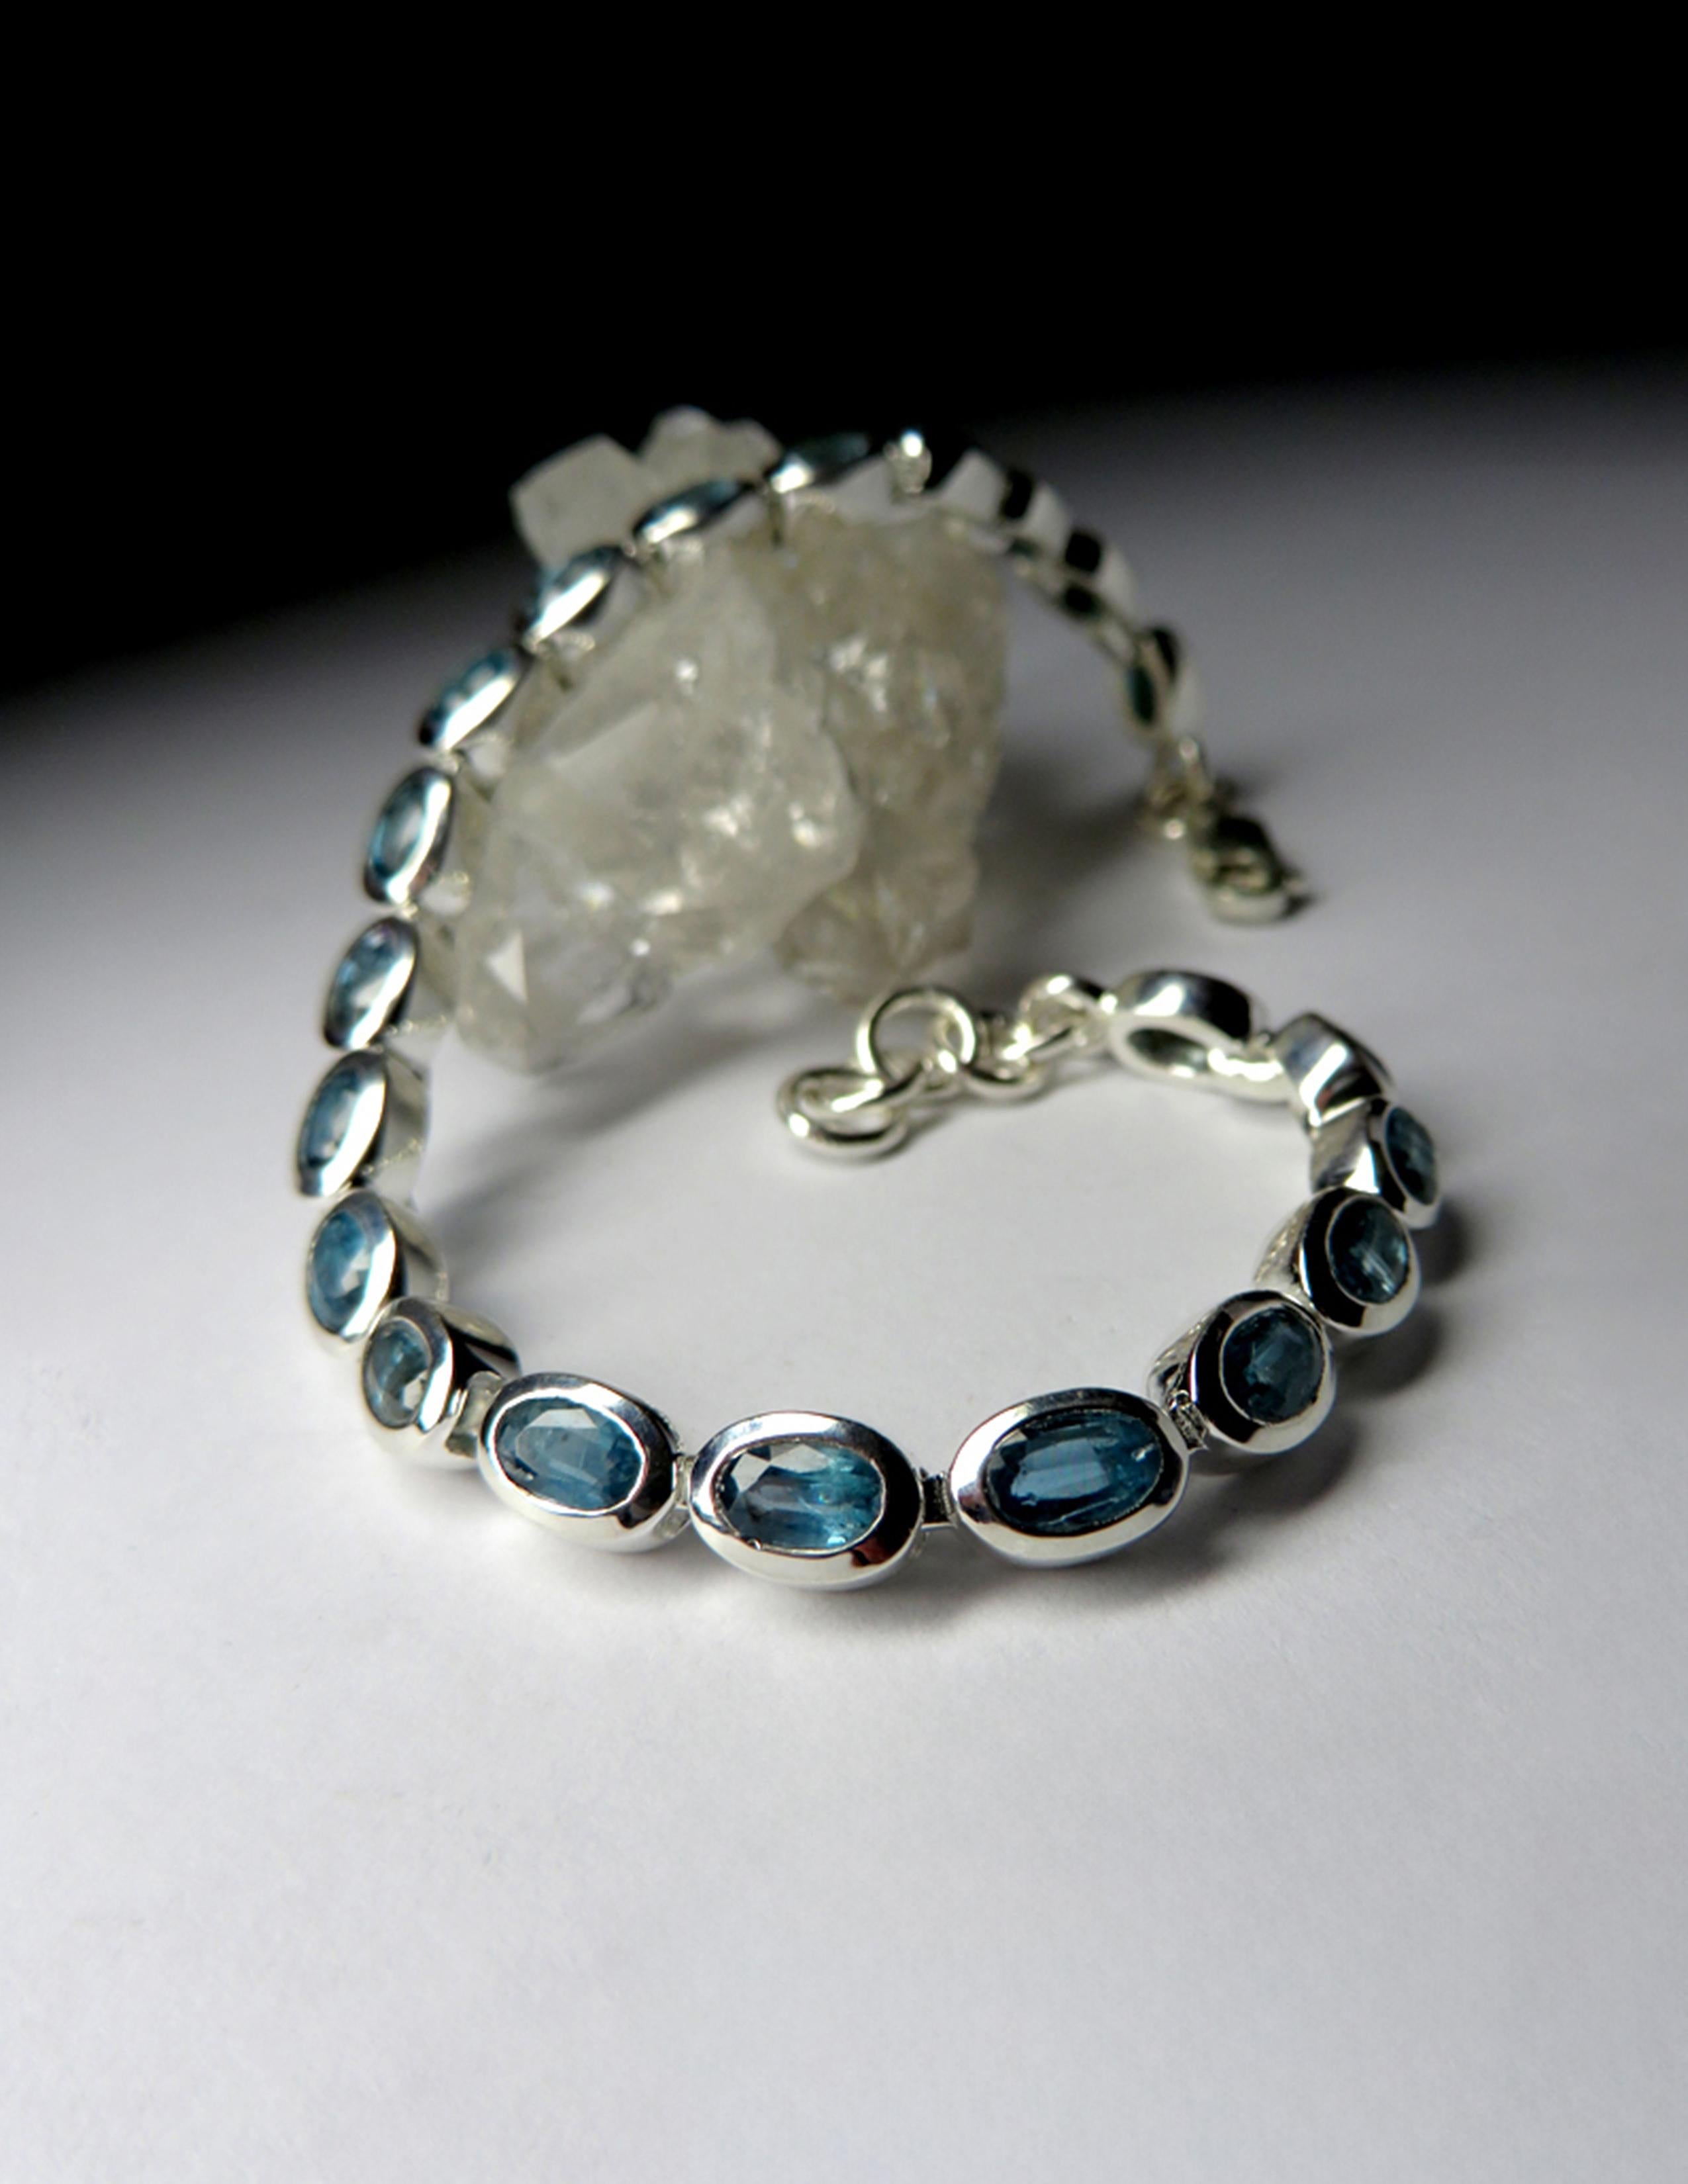 Silver bracelet with natural Kyanite
kyanite origin - Nepal
stone measurements - 0.12 x 0.2 in / 3 x 5 mm
bracelet weight - 12.42 grams
bracelet length from 6.89 to 7.68 in / from 17.5 to 19.5 cm